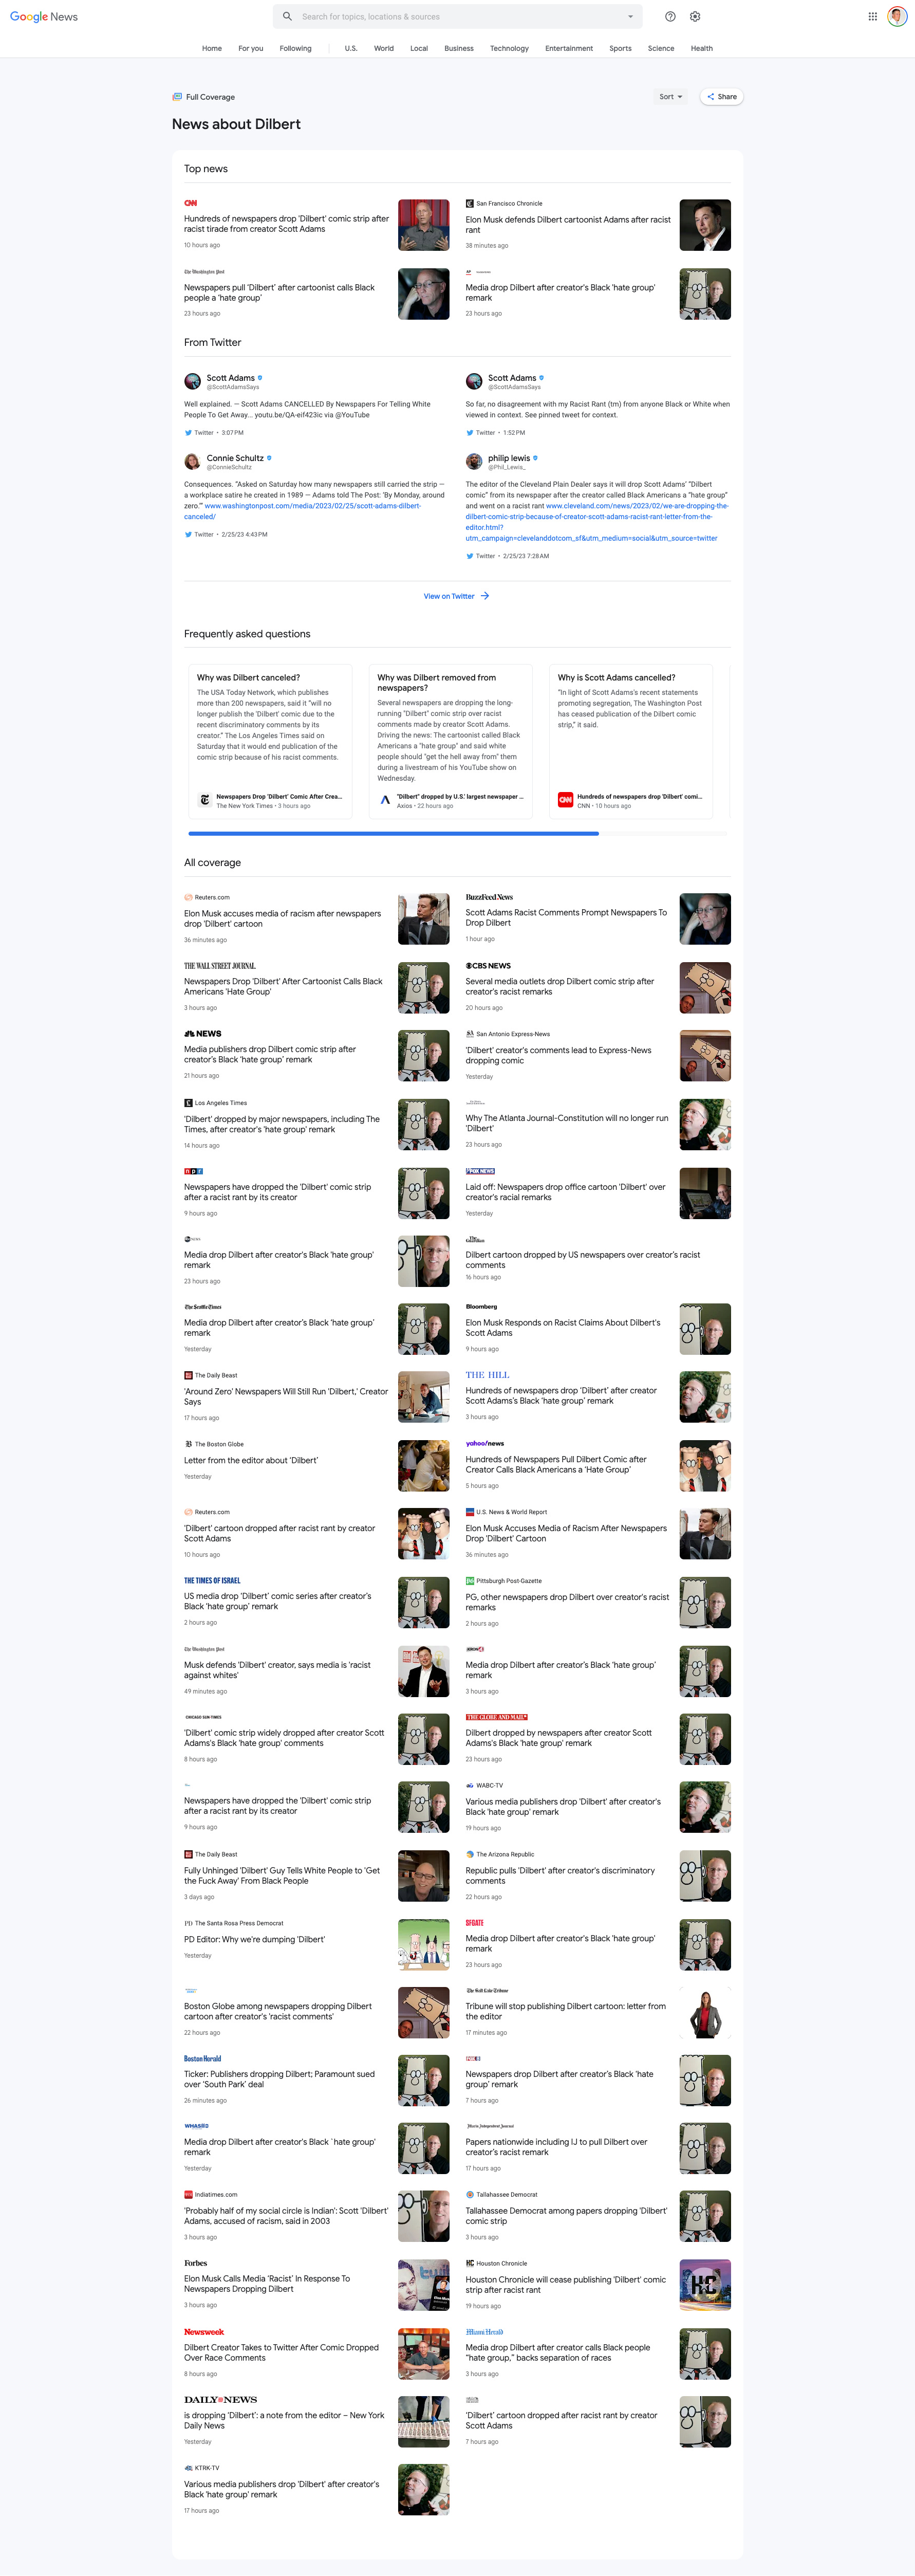 Google News results for Dilbert search